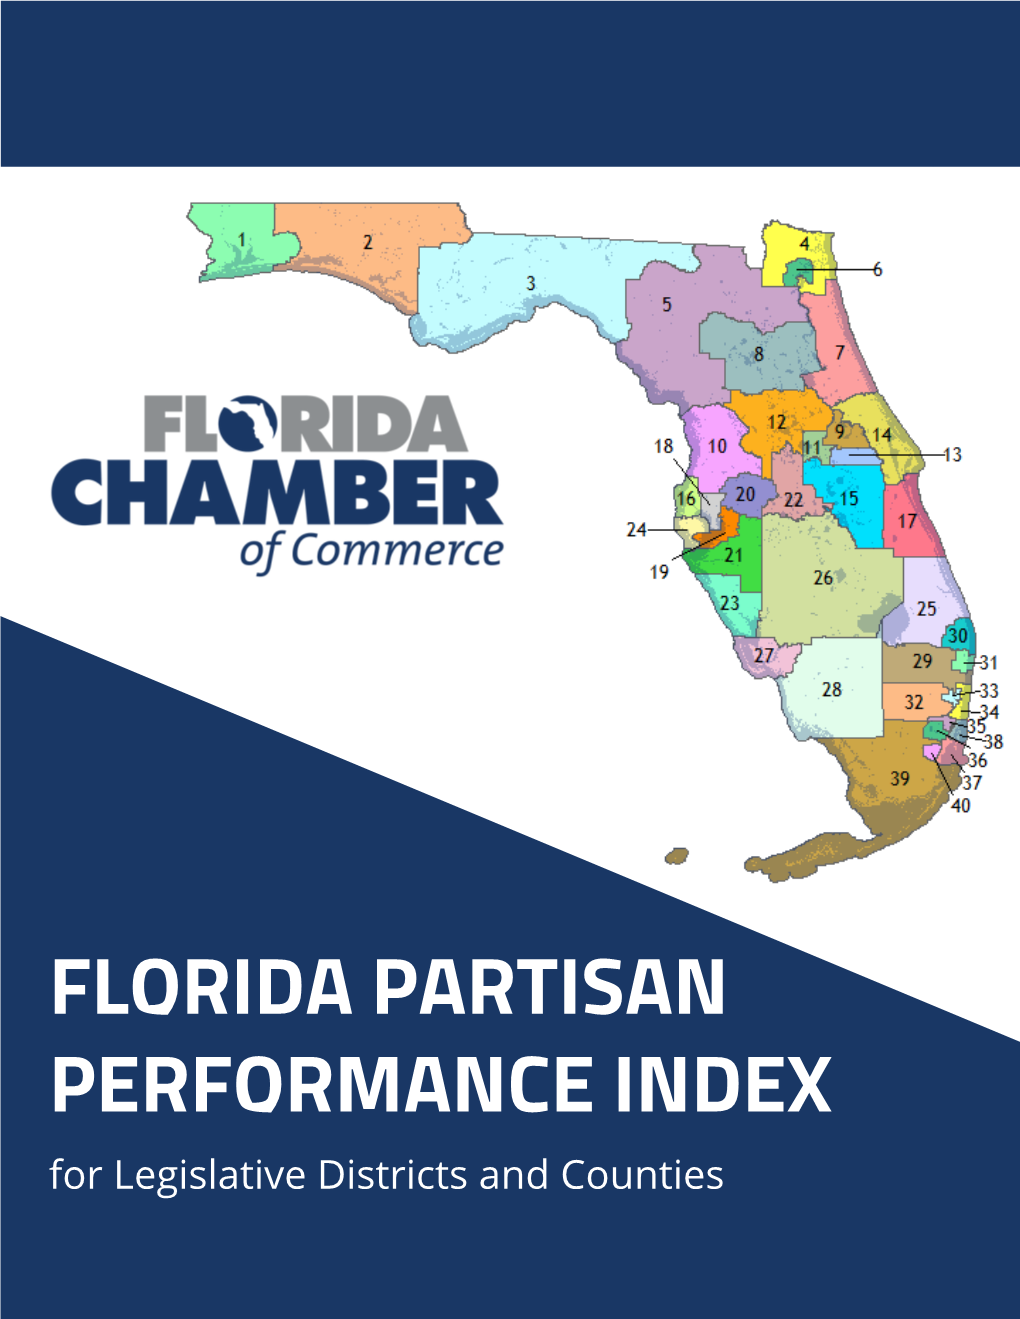 FLORIDA PARTISAN PERFORMANCE INDEX for Legislative Districts and Counties